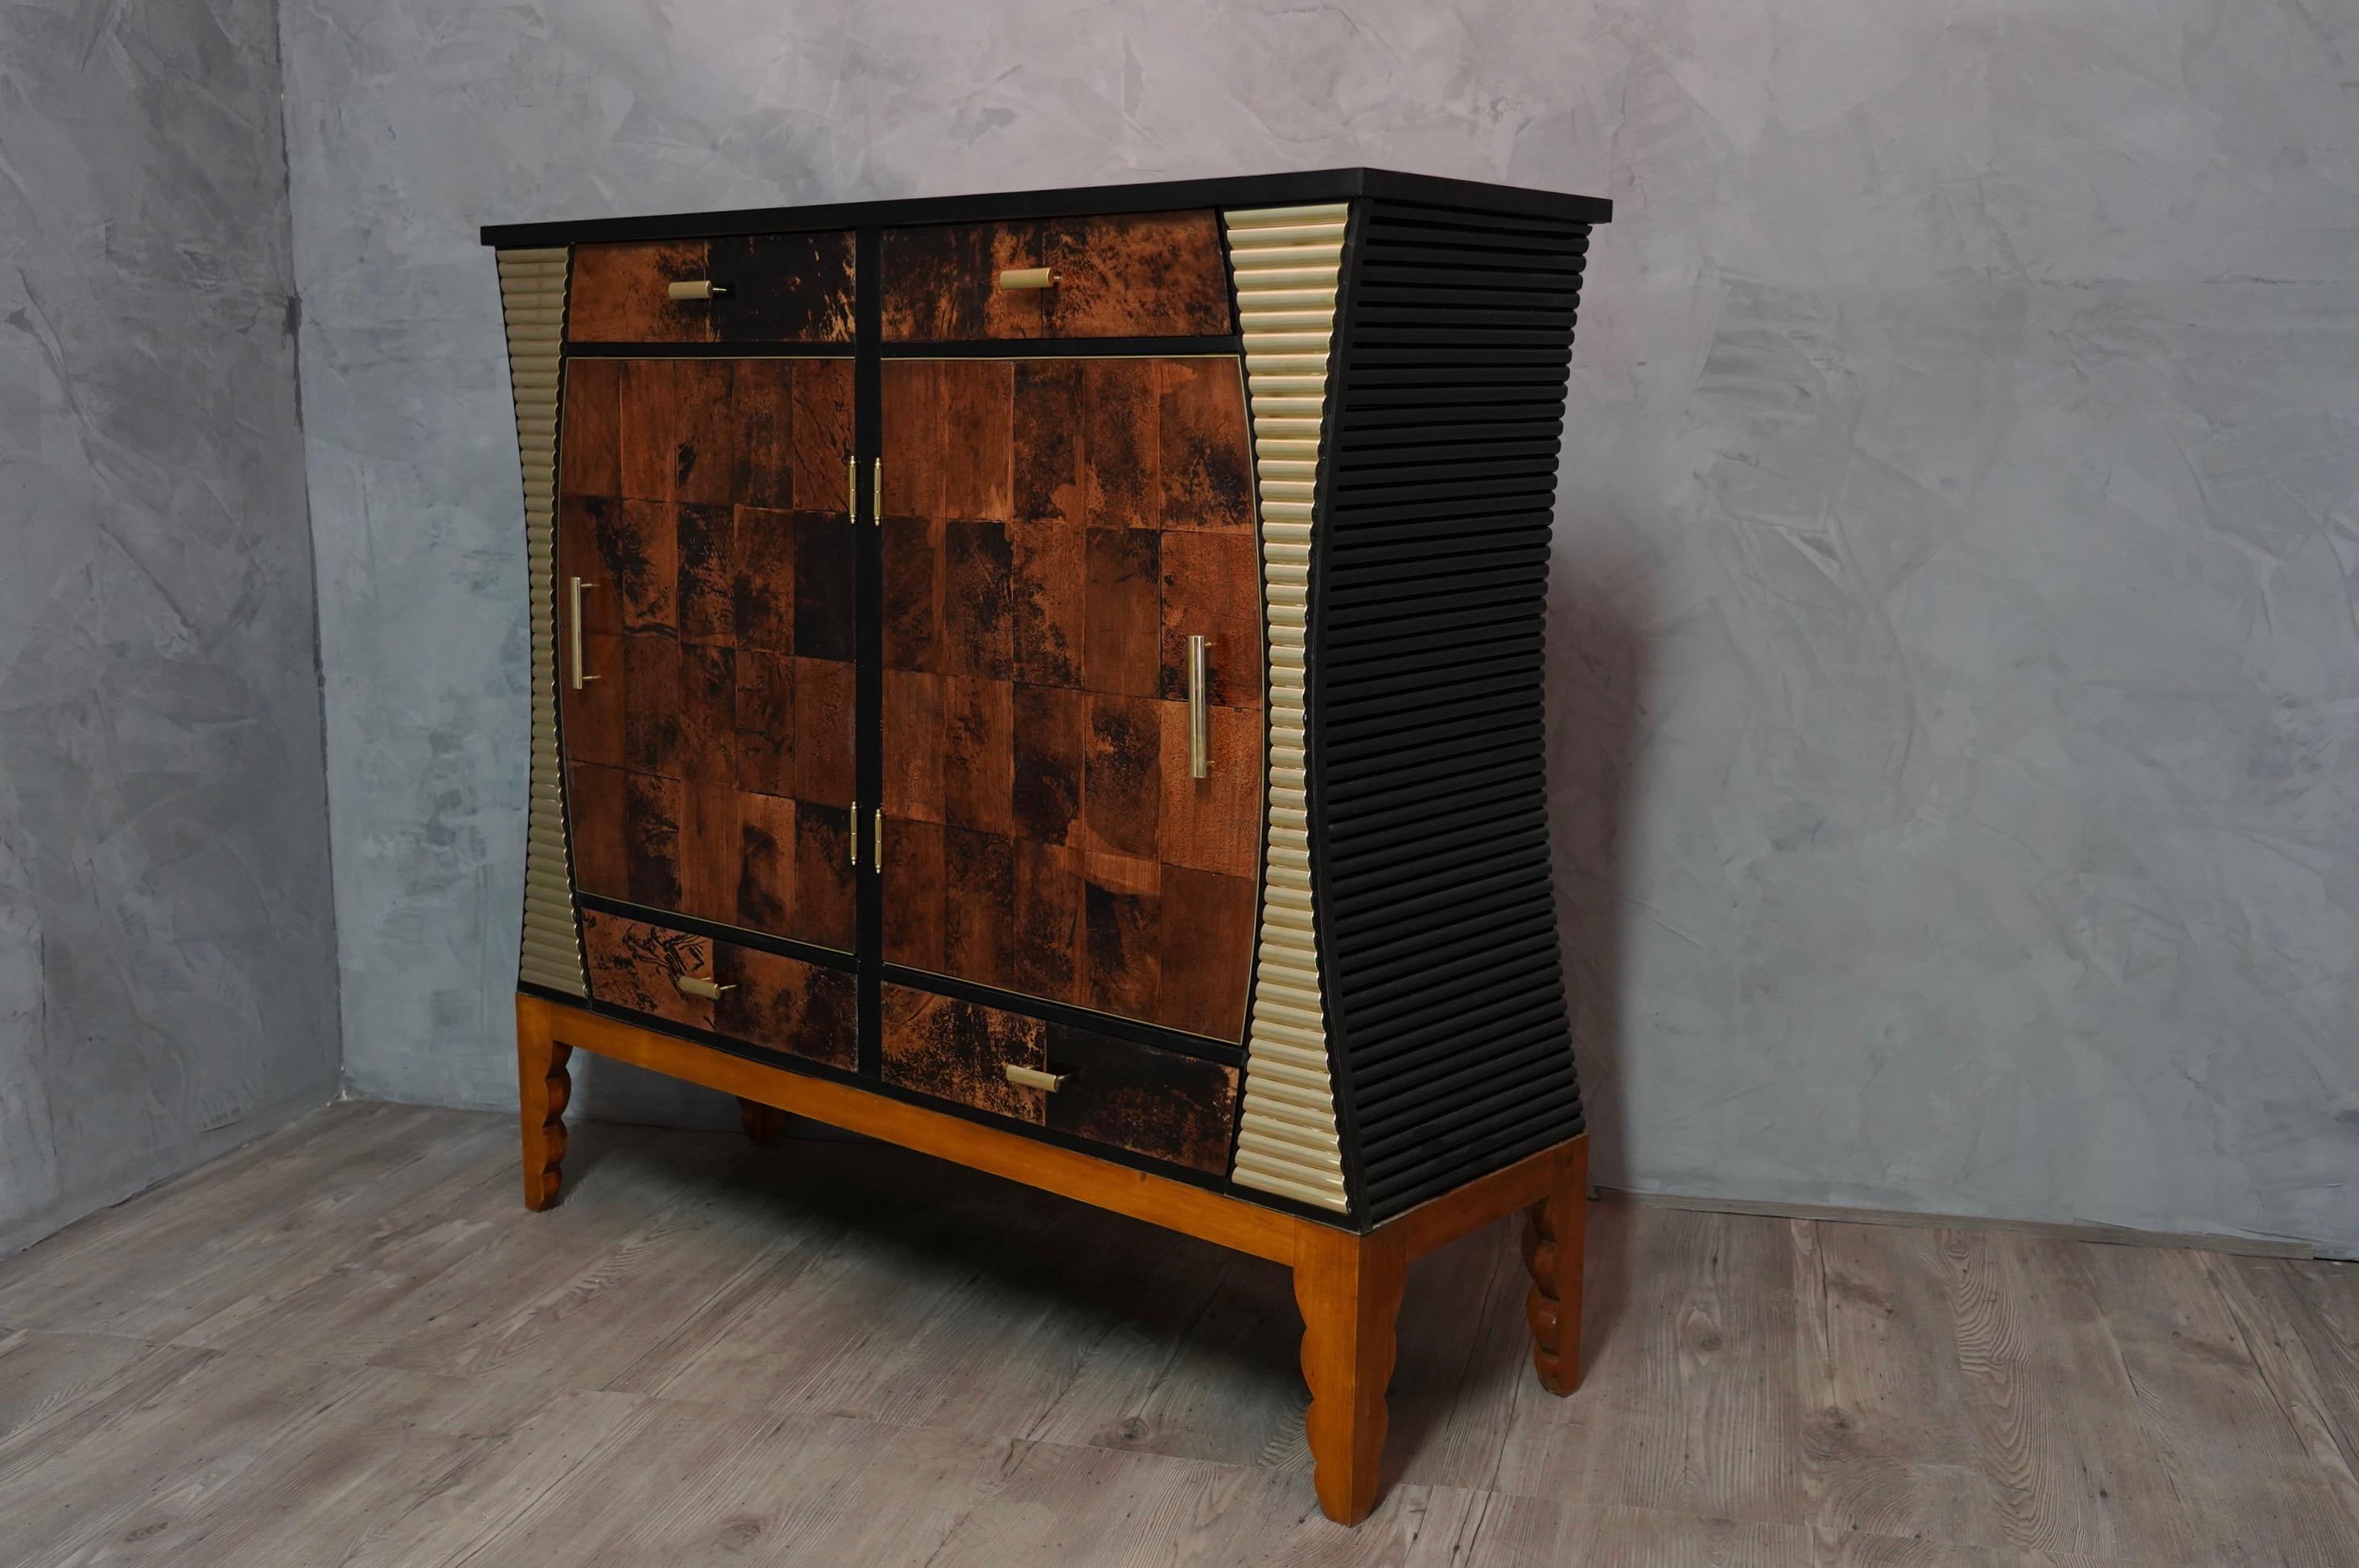 Amazing design for a truly unique sideboards with goatskin doors and beautiful polished brass inserts. Original piece from the mid-20th century. Composed of fine materials that perfectly match each other, this dining room furniture by Aldo